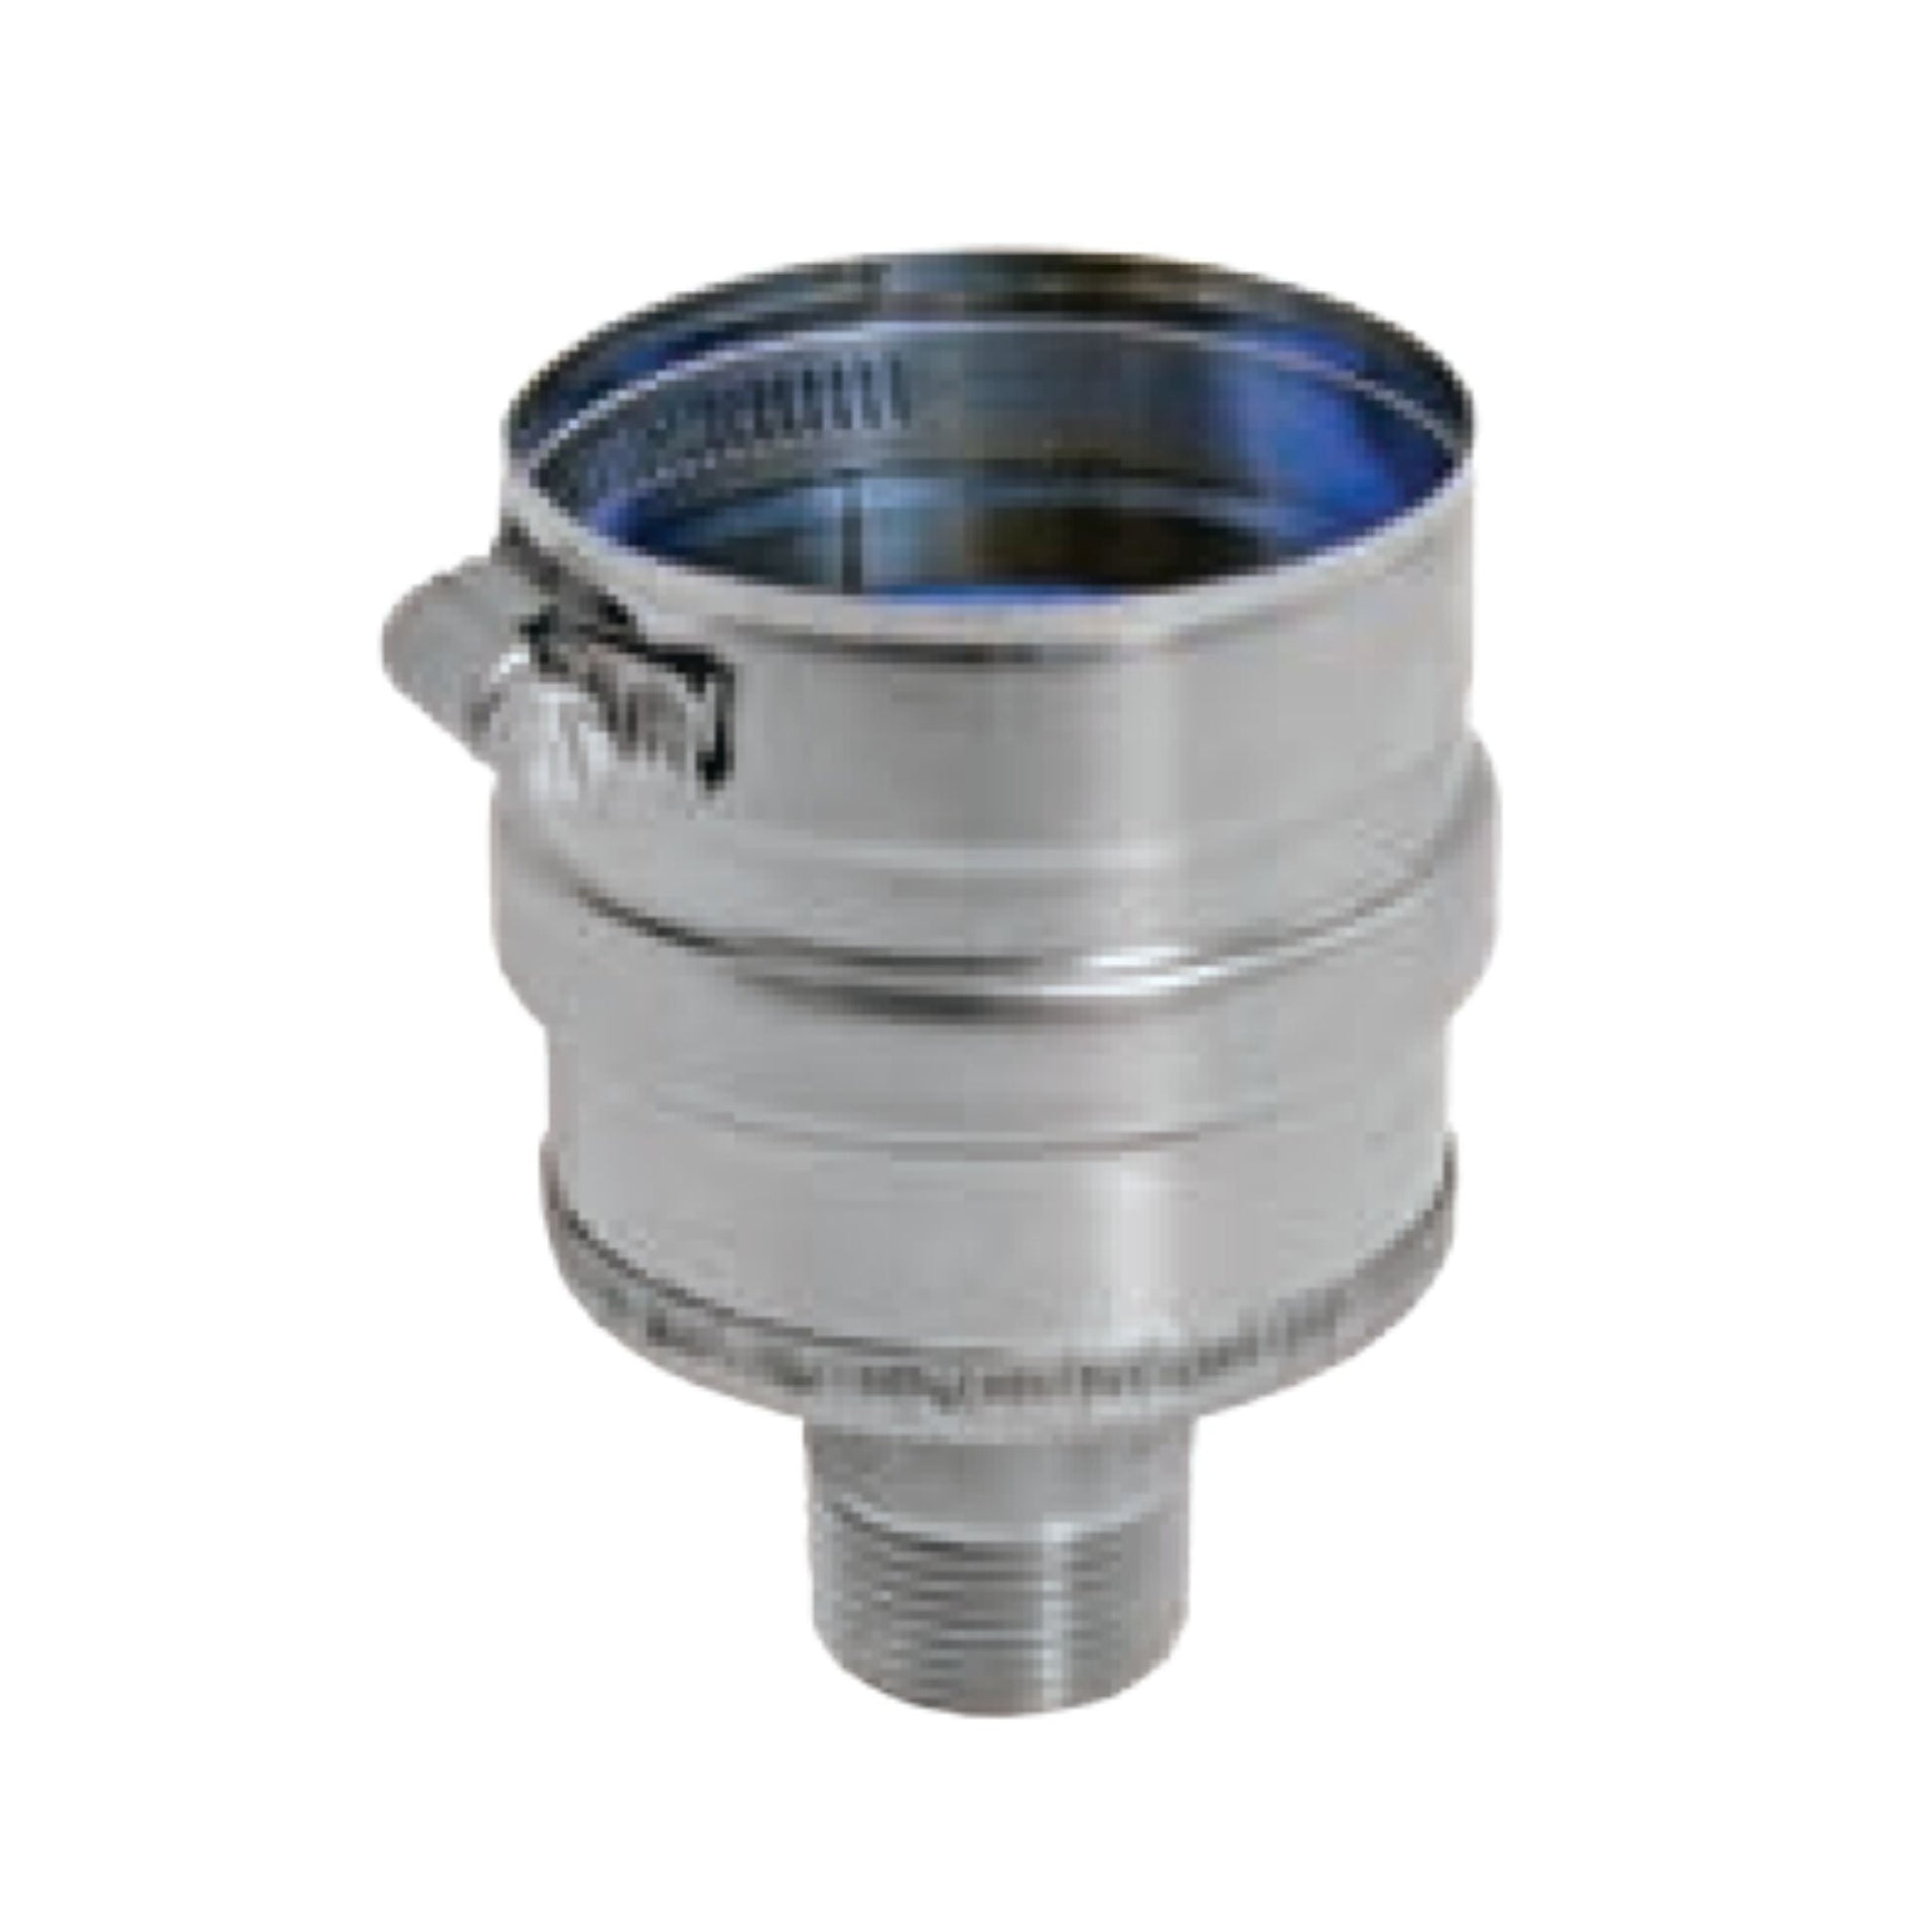 DuraVent FasNSeal 5" 29-4C Stainless Steel IPS Drain Fitting